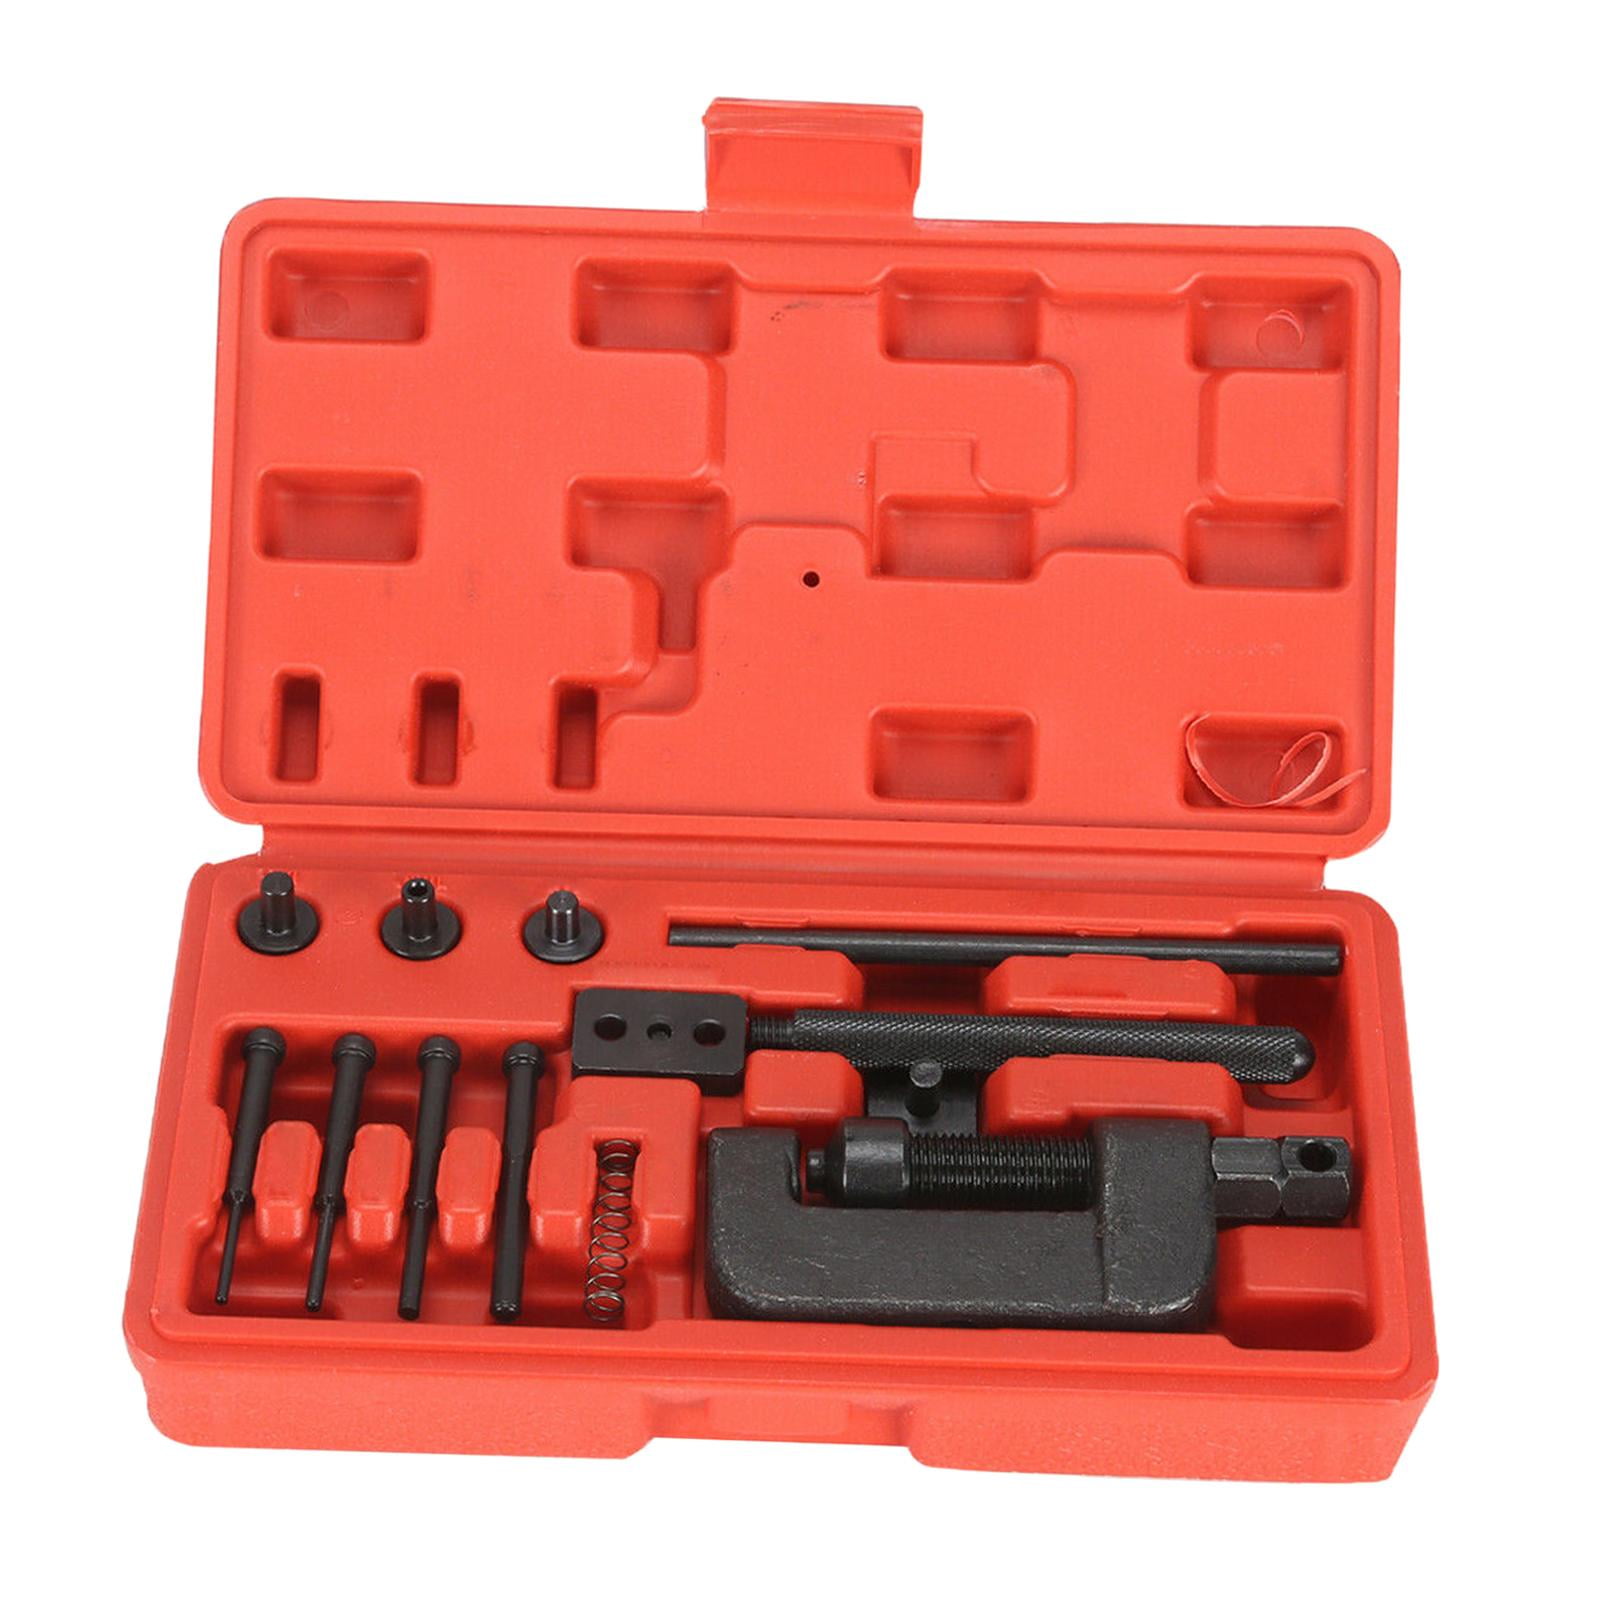 Bicycle Chain Repair Tool Kit Cycling Chain Breaker Splitter Cutter Remover Set